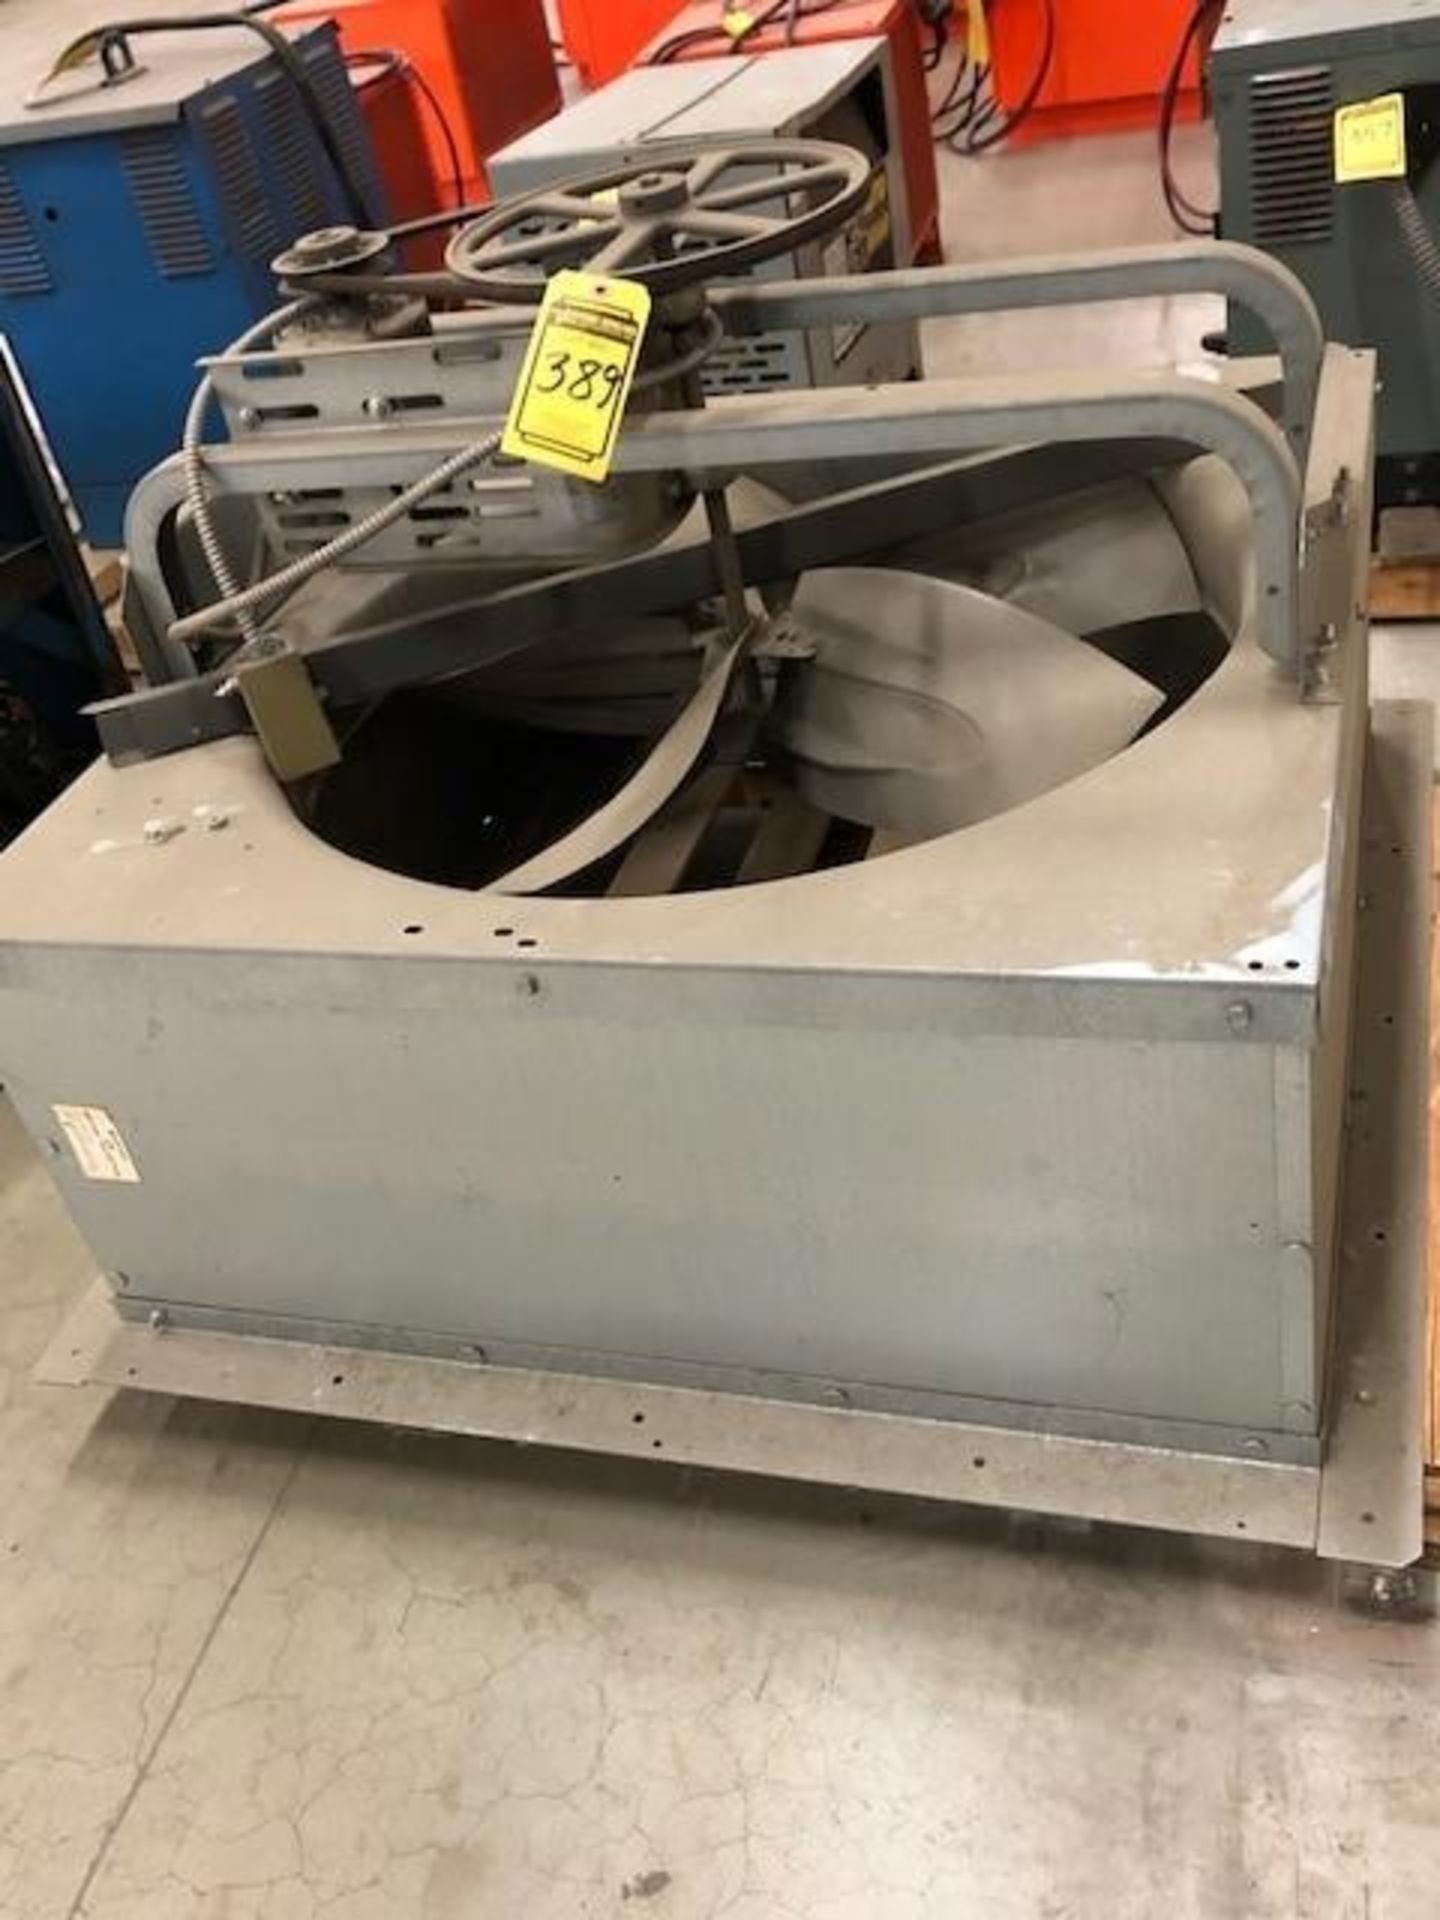 GREENHECK EXHAUST FAN; MODEL SBE-1136-7, S/N 00006388 ***LOCATED AT 13000 DARICE PARKWAY,